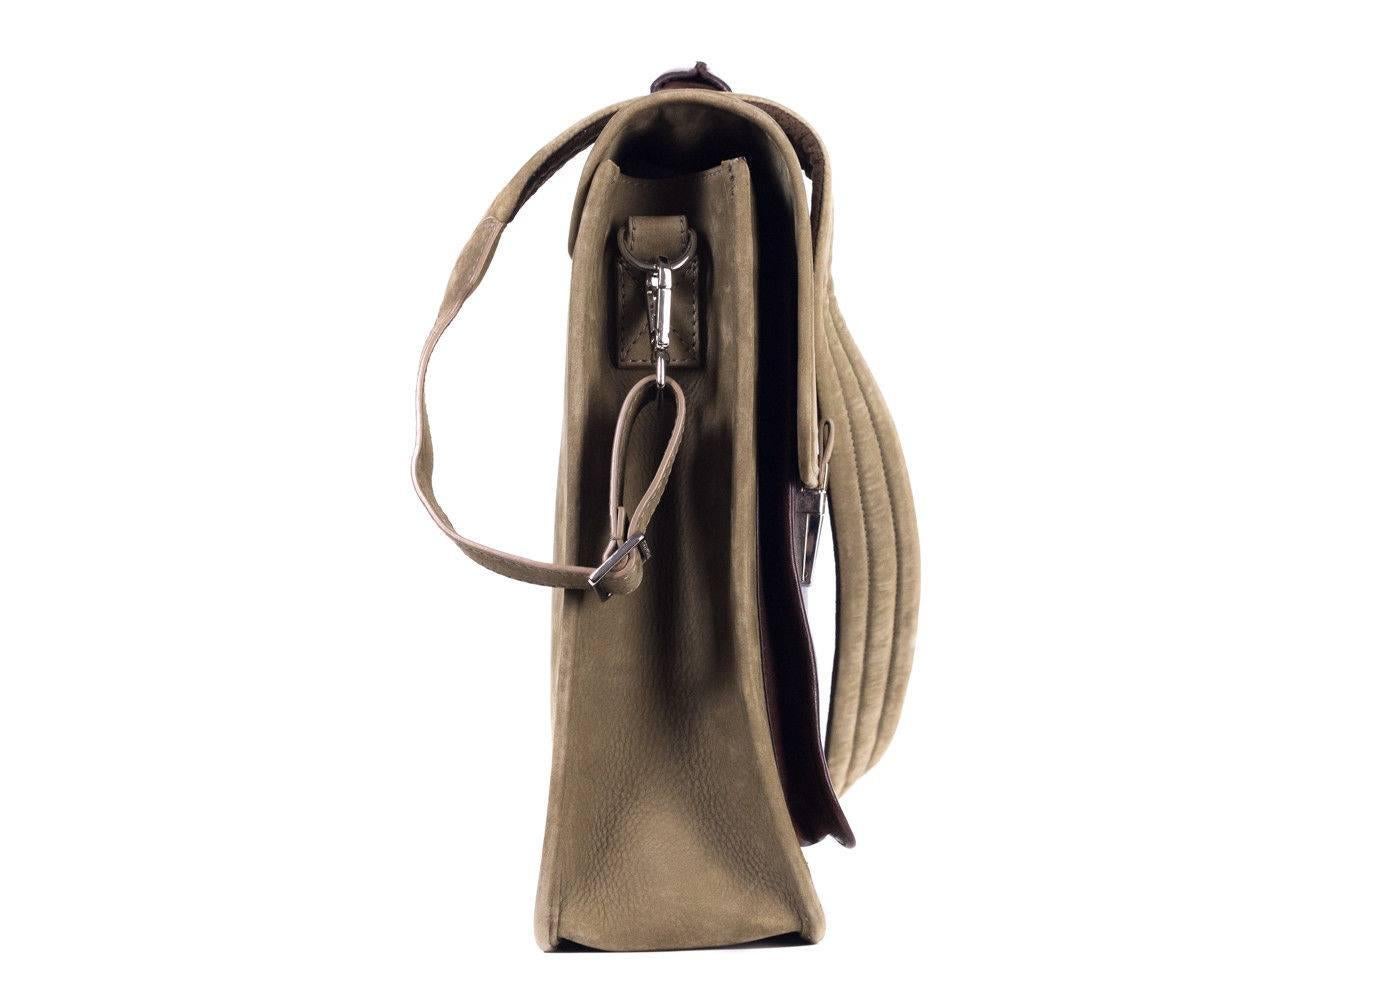 Brand New Brunello Cucinelli Messenger
Dust Bag Included
Retails in Stores & Online for $1750
Dimensions: 18